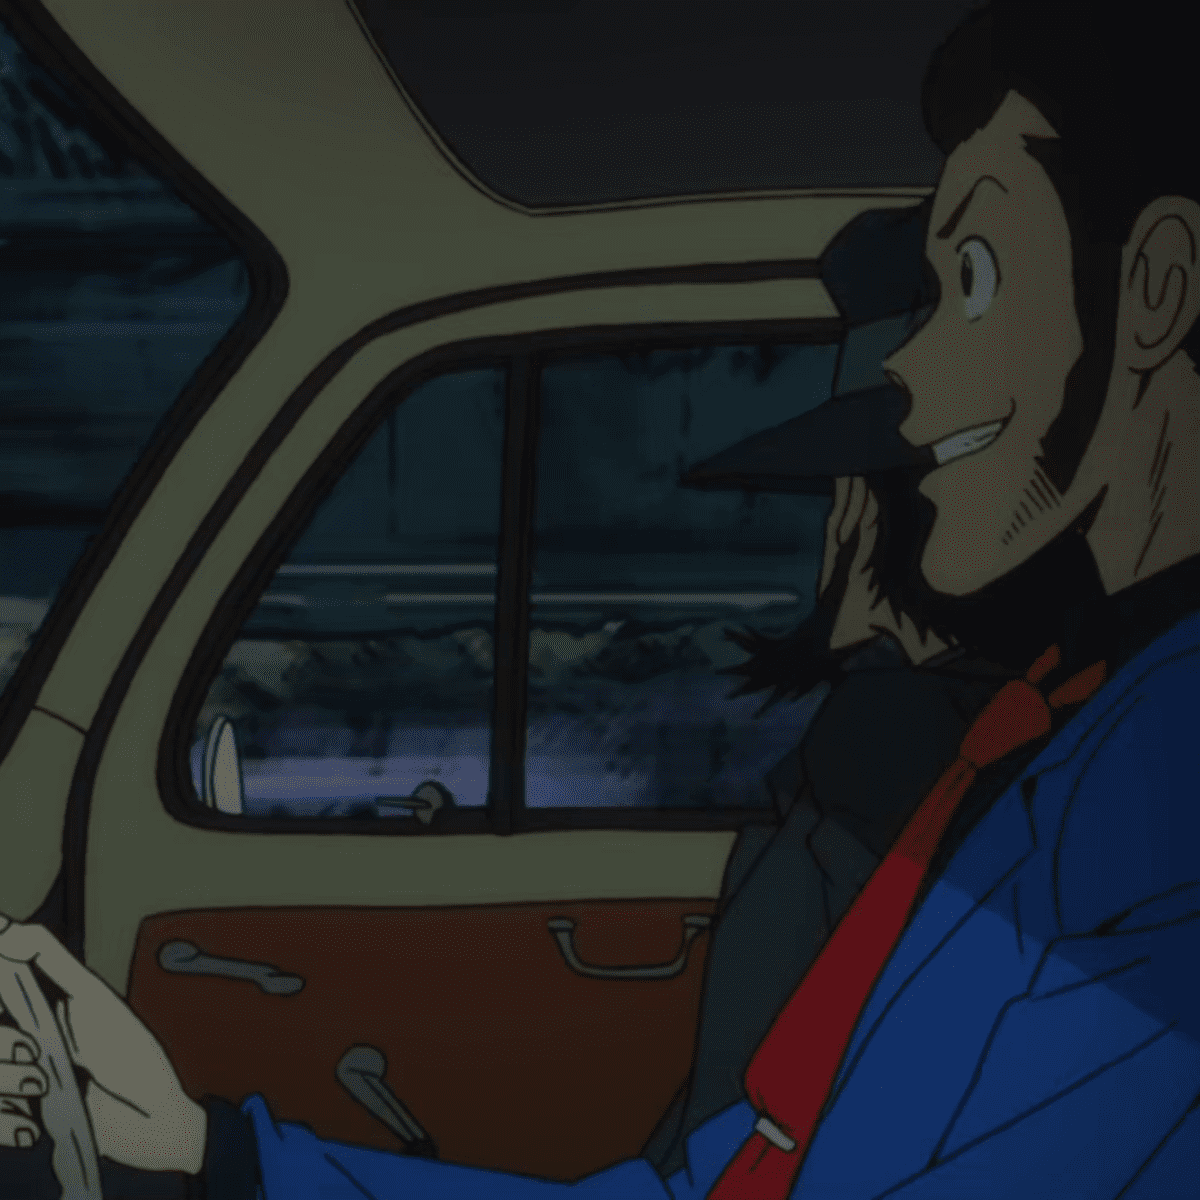 Lupin III The First a 3DCG anime movie was scheduled to release on March  13 by VKAAO but was cancelled due to the recent crisis You can still  create a screening in